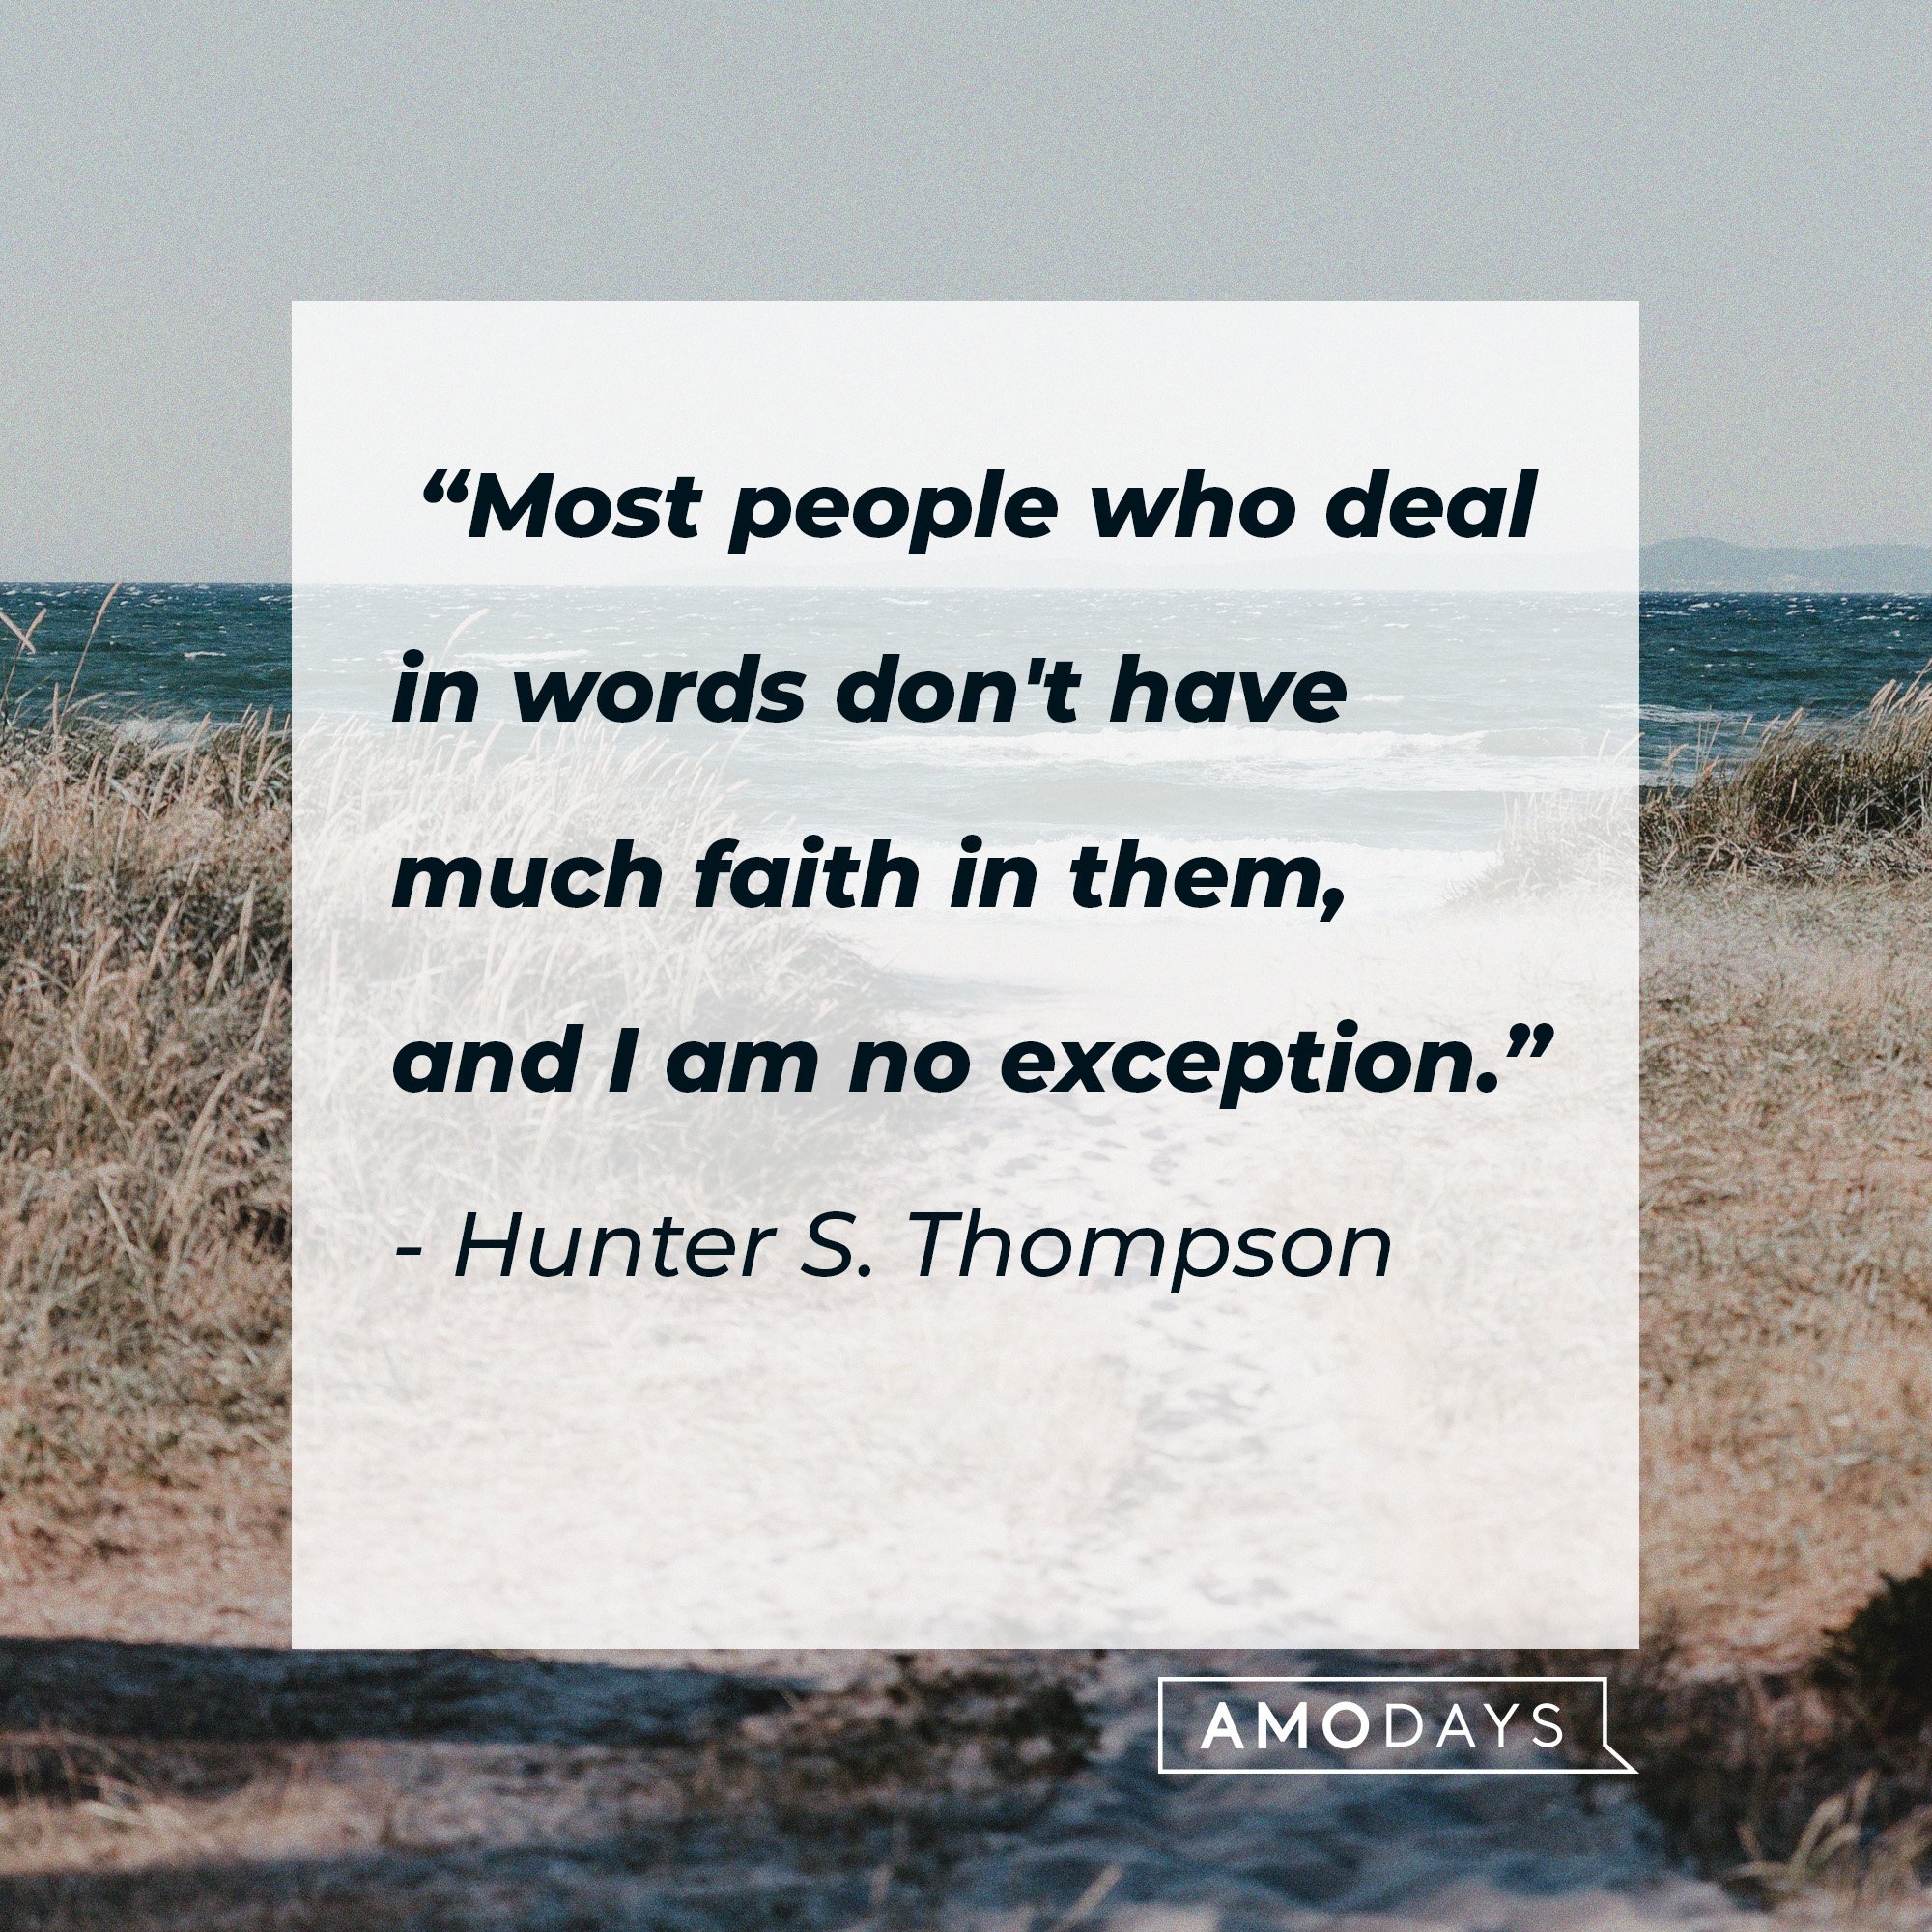 Hunter S. Thompson’s quote: “Most people who deal in words don't have much faith in them, and I am no exception.” | Image: AmoDays